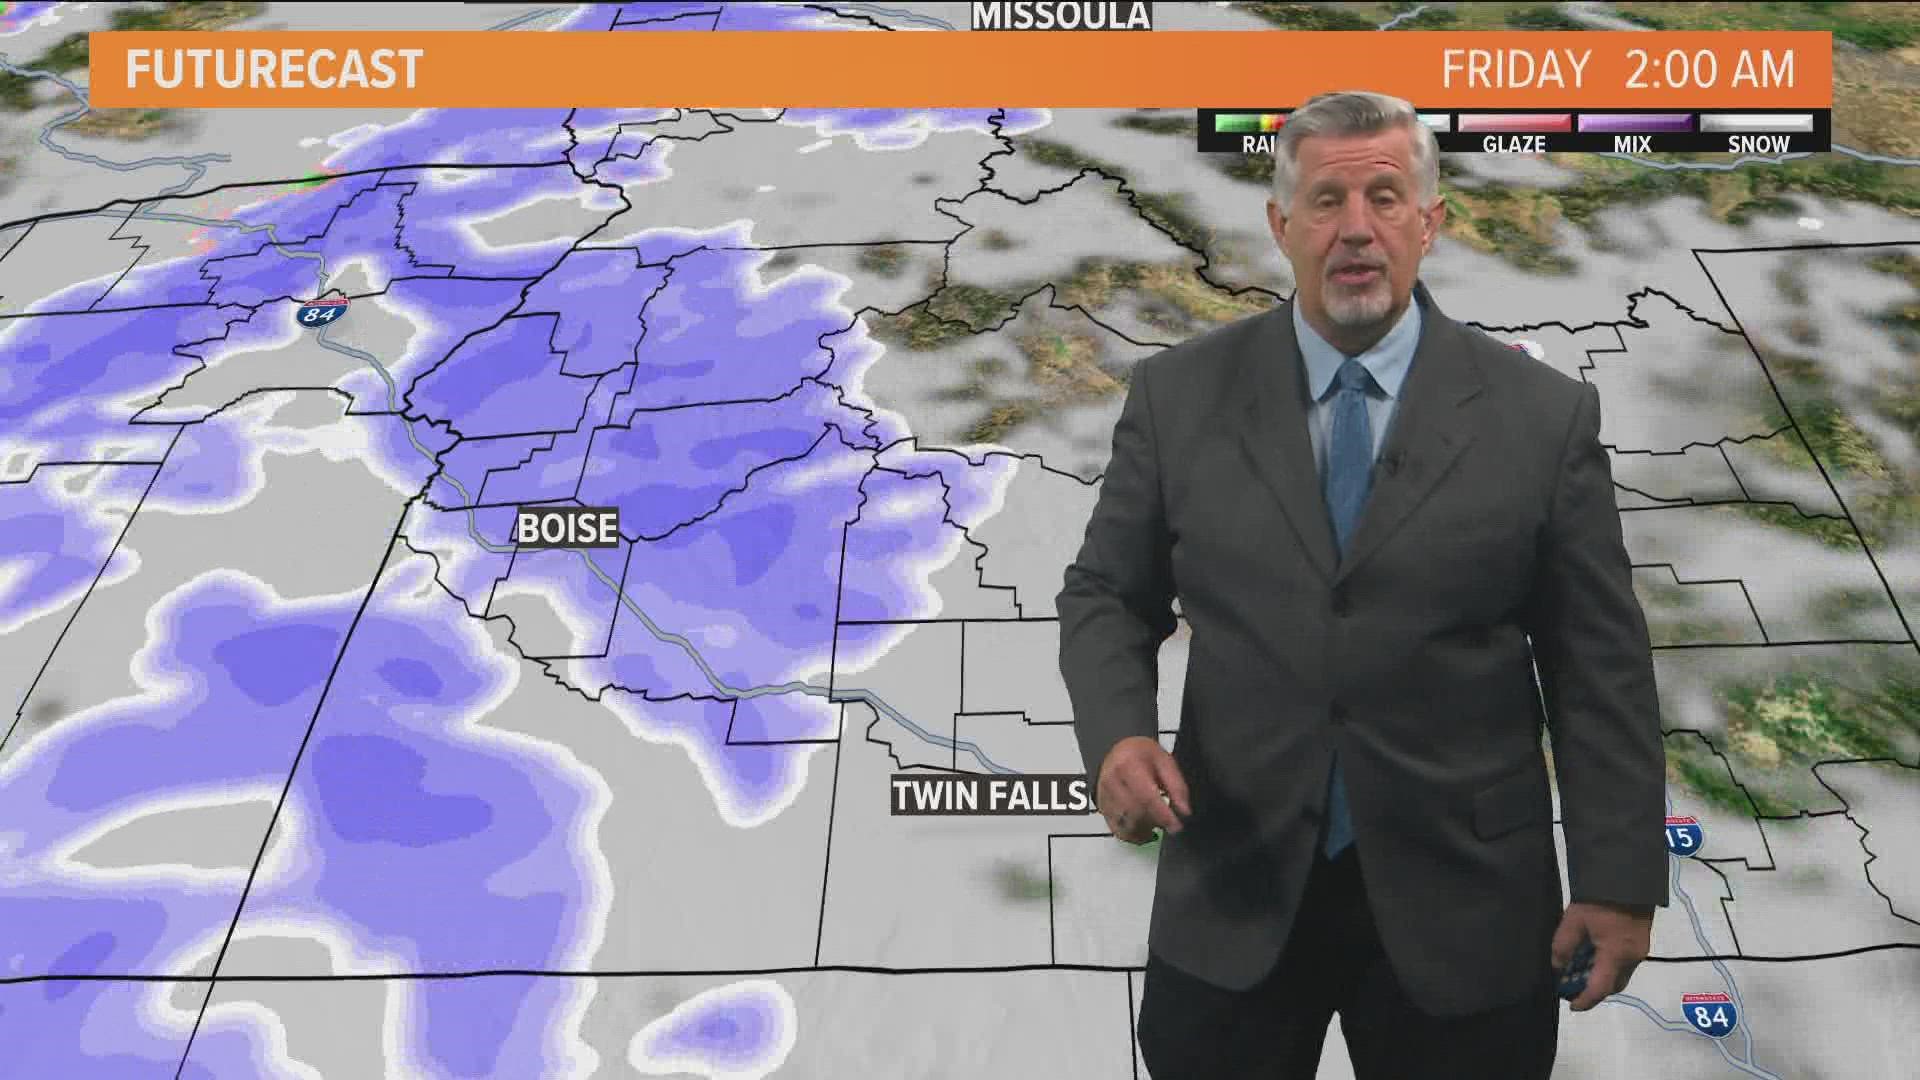 KTVB First Alert Weather Thursday, Dec. 8, 2022, in Boise, Idaho, with meteorologist Jim Duthie.